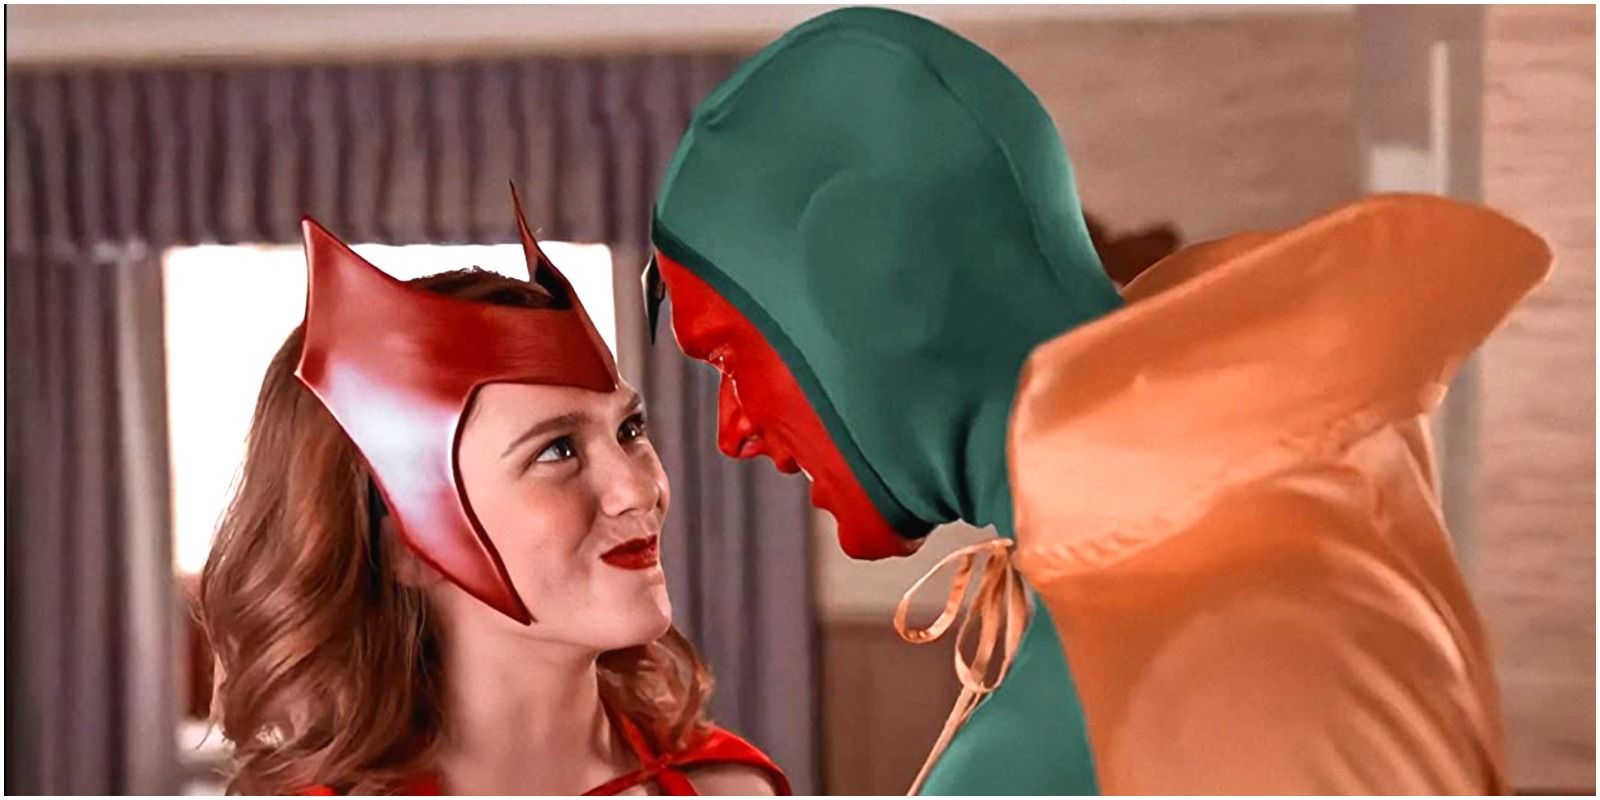 Wanda and Vision dressing up as their comic book counterpart from WandaVision